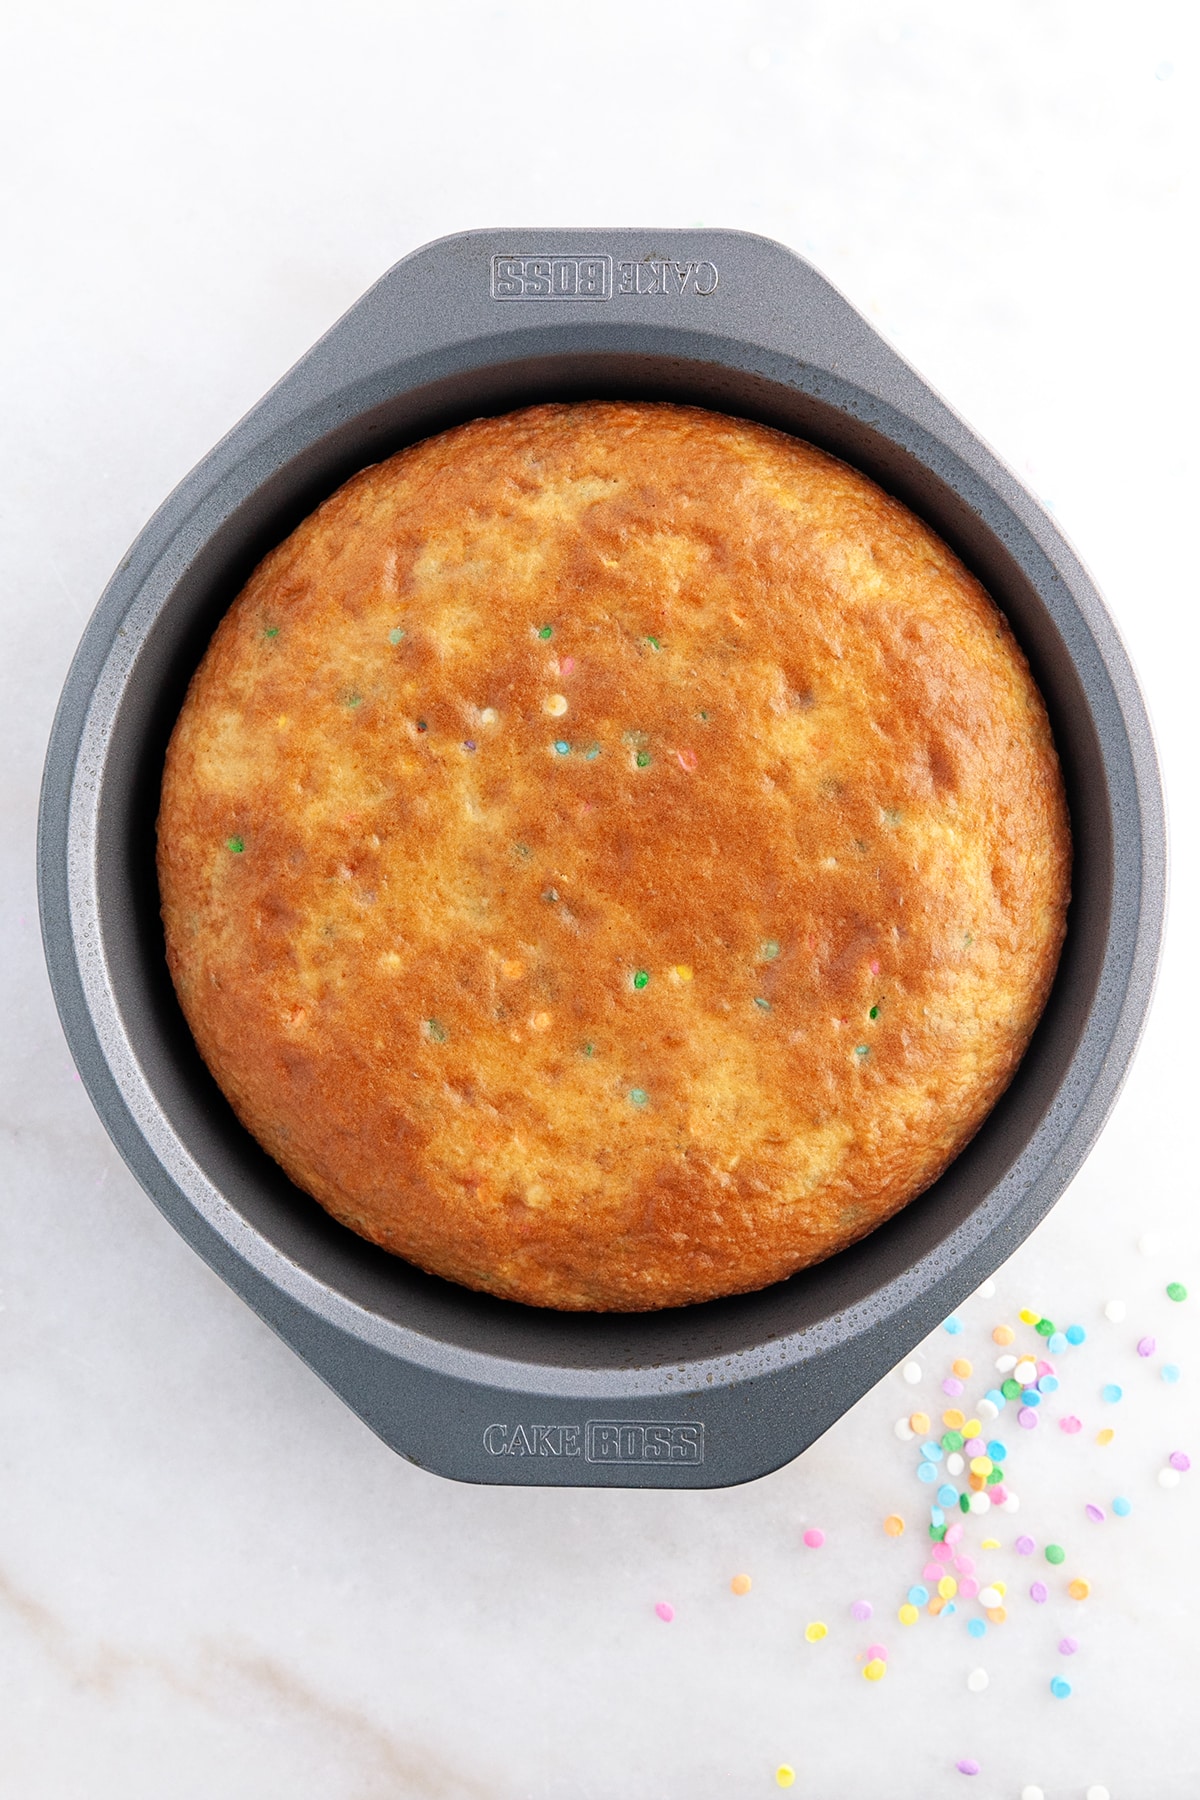 Baked cake in a round pan. 